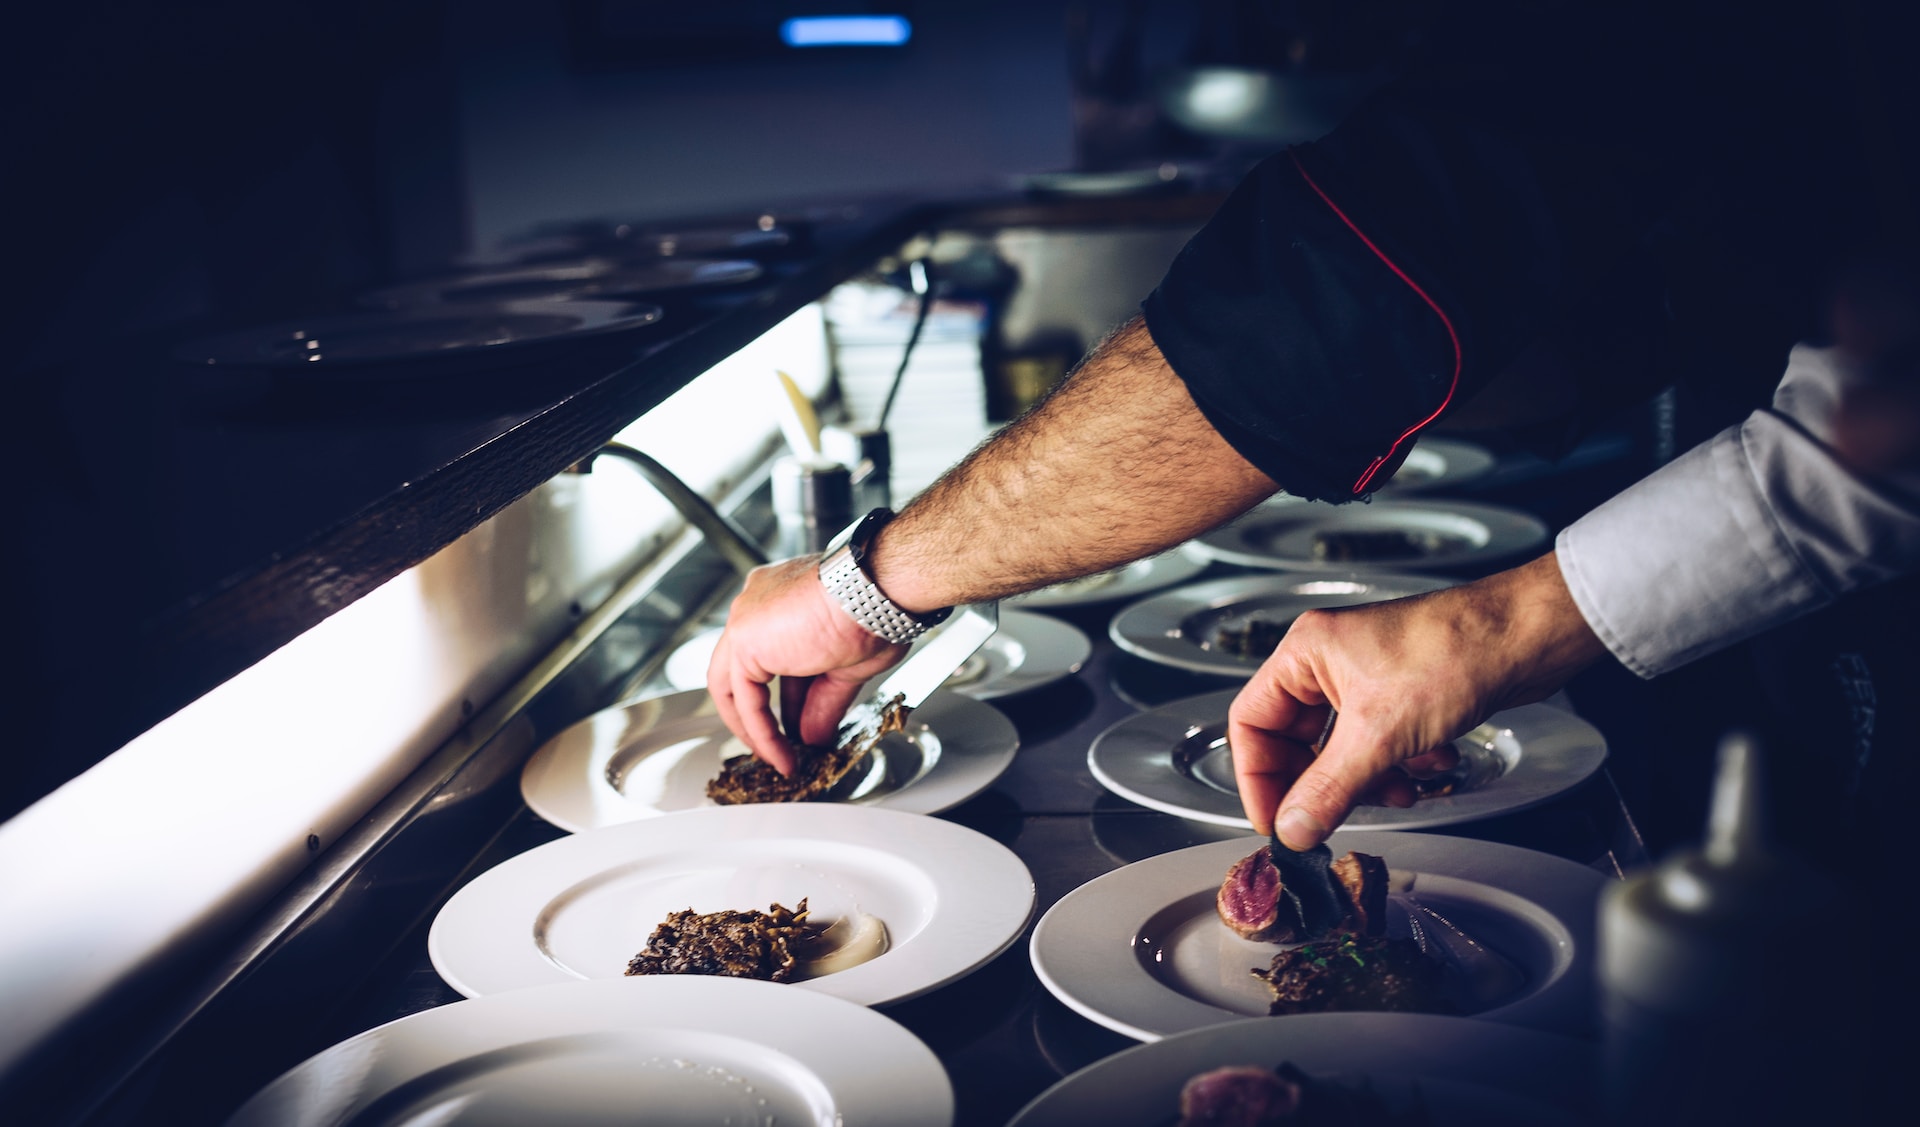 A chef plating food